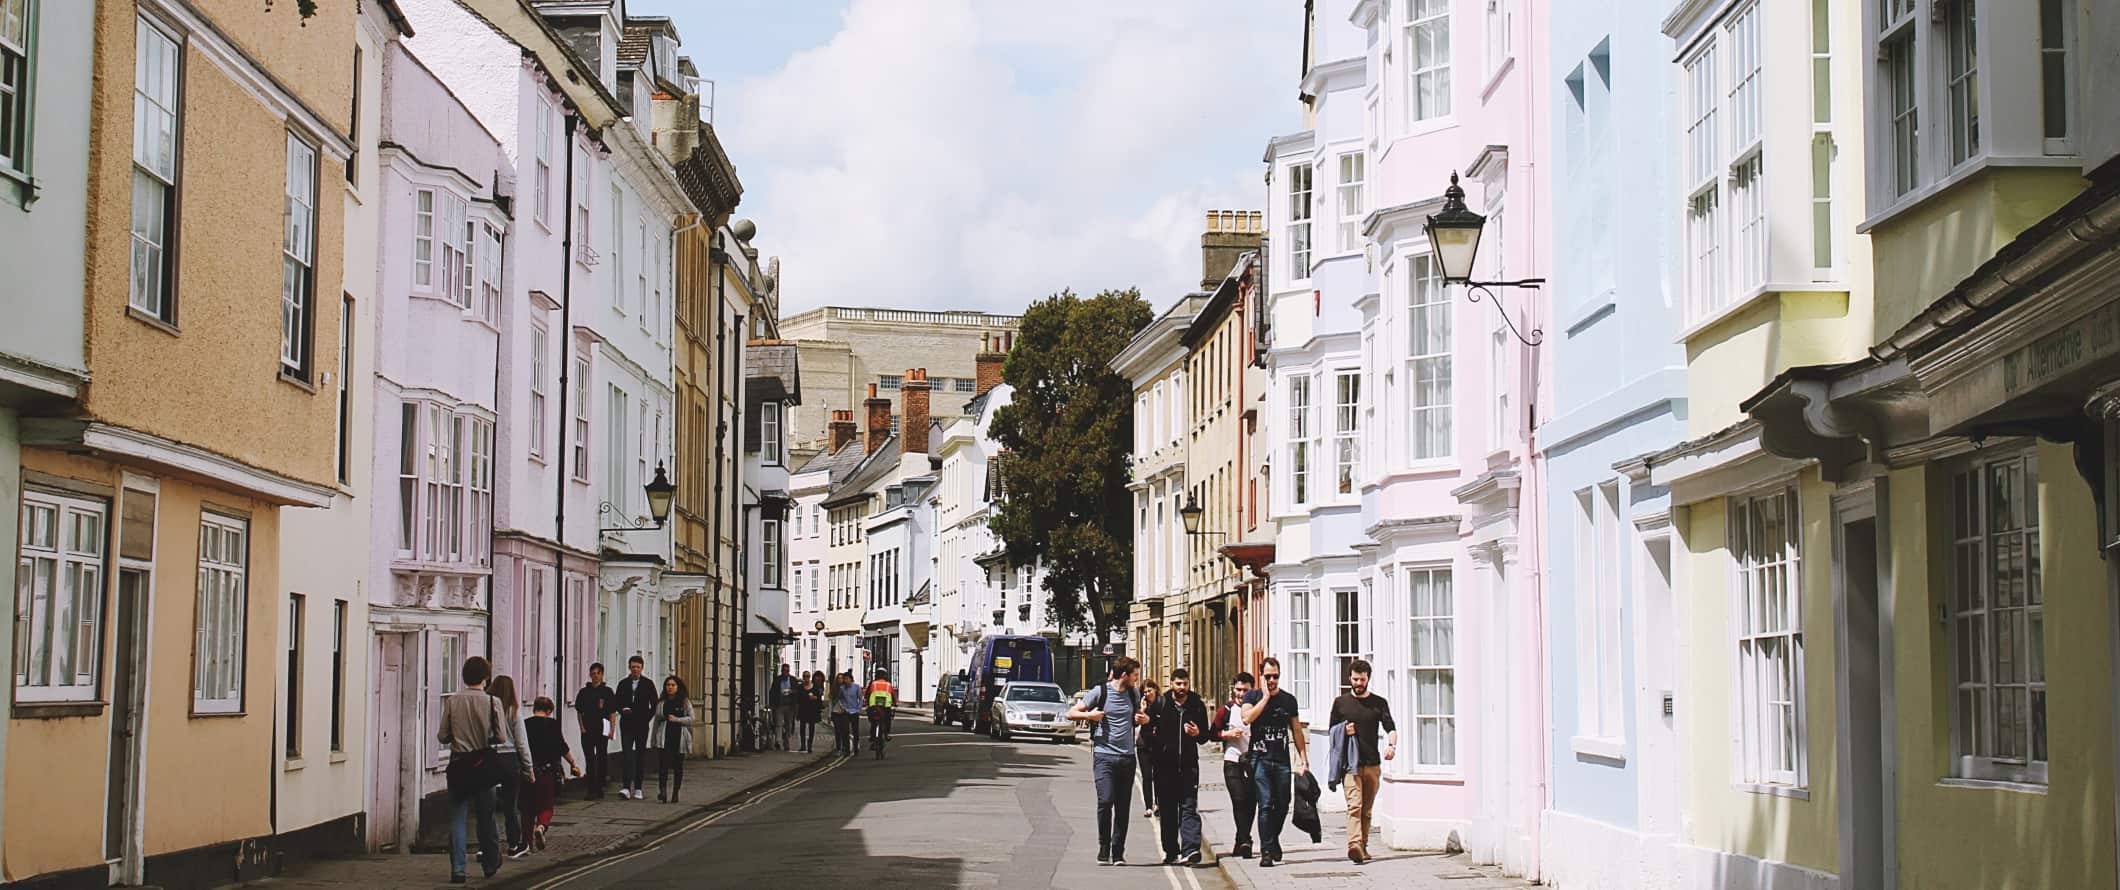 People walking down a street lined with pastel-colored townhouses in the town of Oxford, England